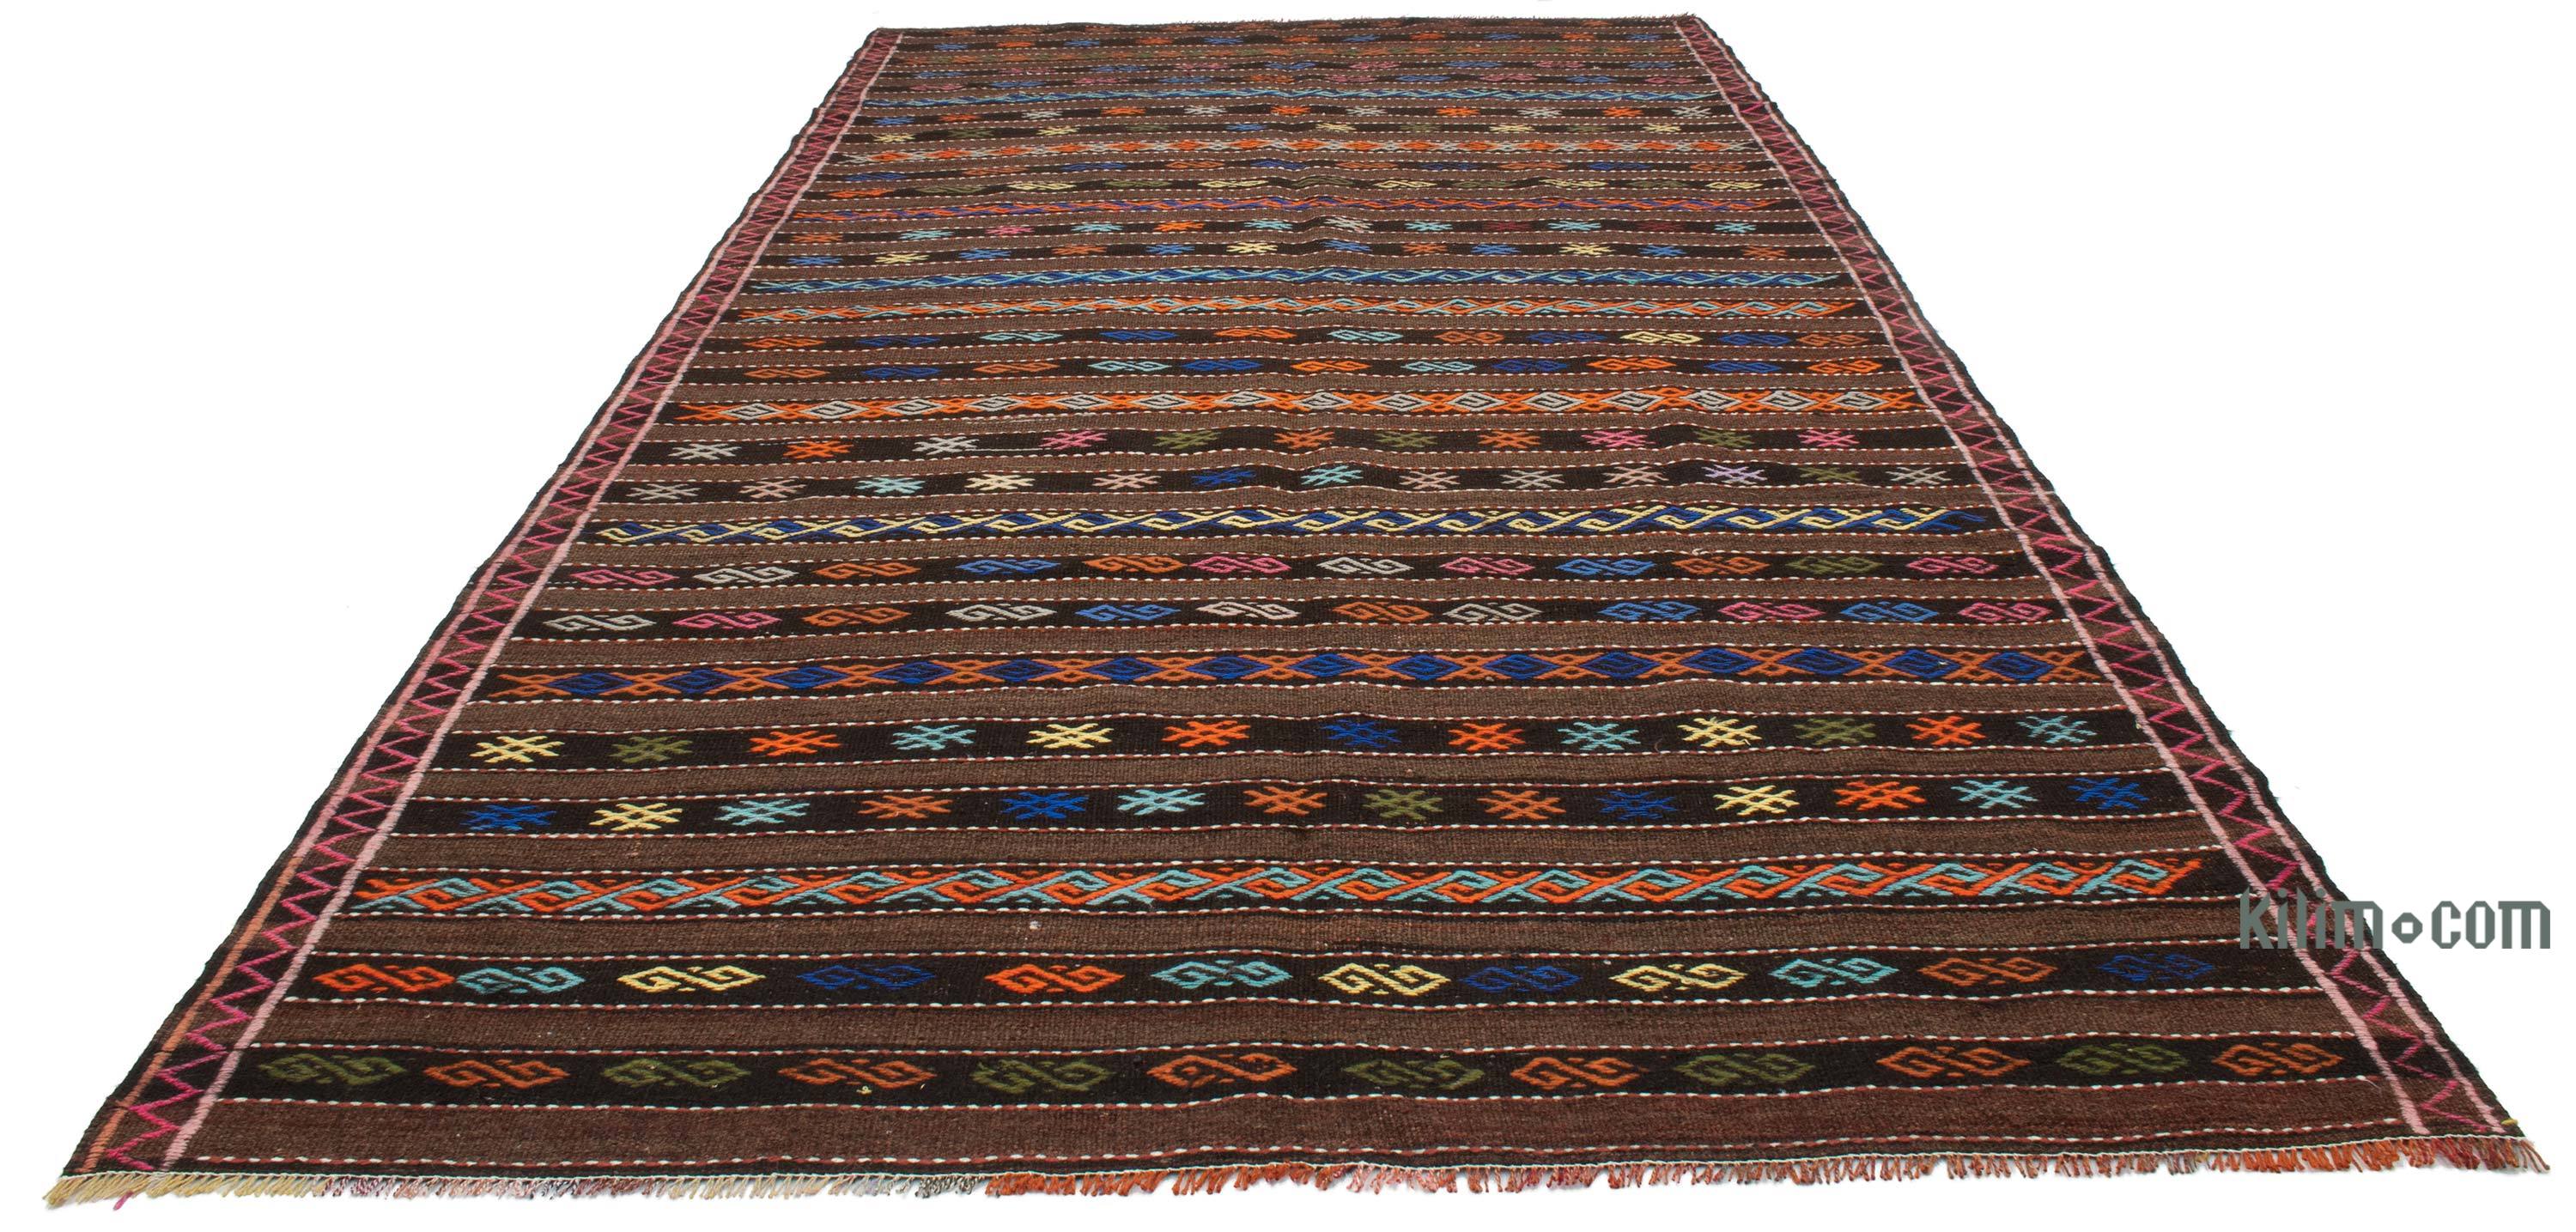 K0052830 Vintage Turkish Hand-Knotted Rug - 2' 4 x 3' 7 (28 x 43)  The  Source for Vintage Rugs, Tribal Kilim Rugs, Wool Turkish Rugs, Overdyed  Persian Rugs, Runner Rugs, Patchwork